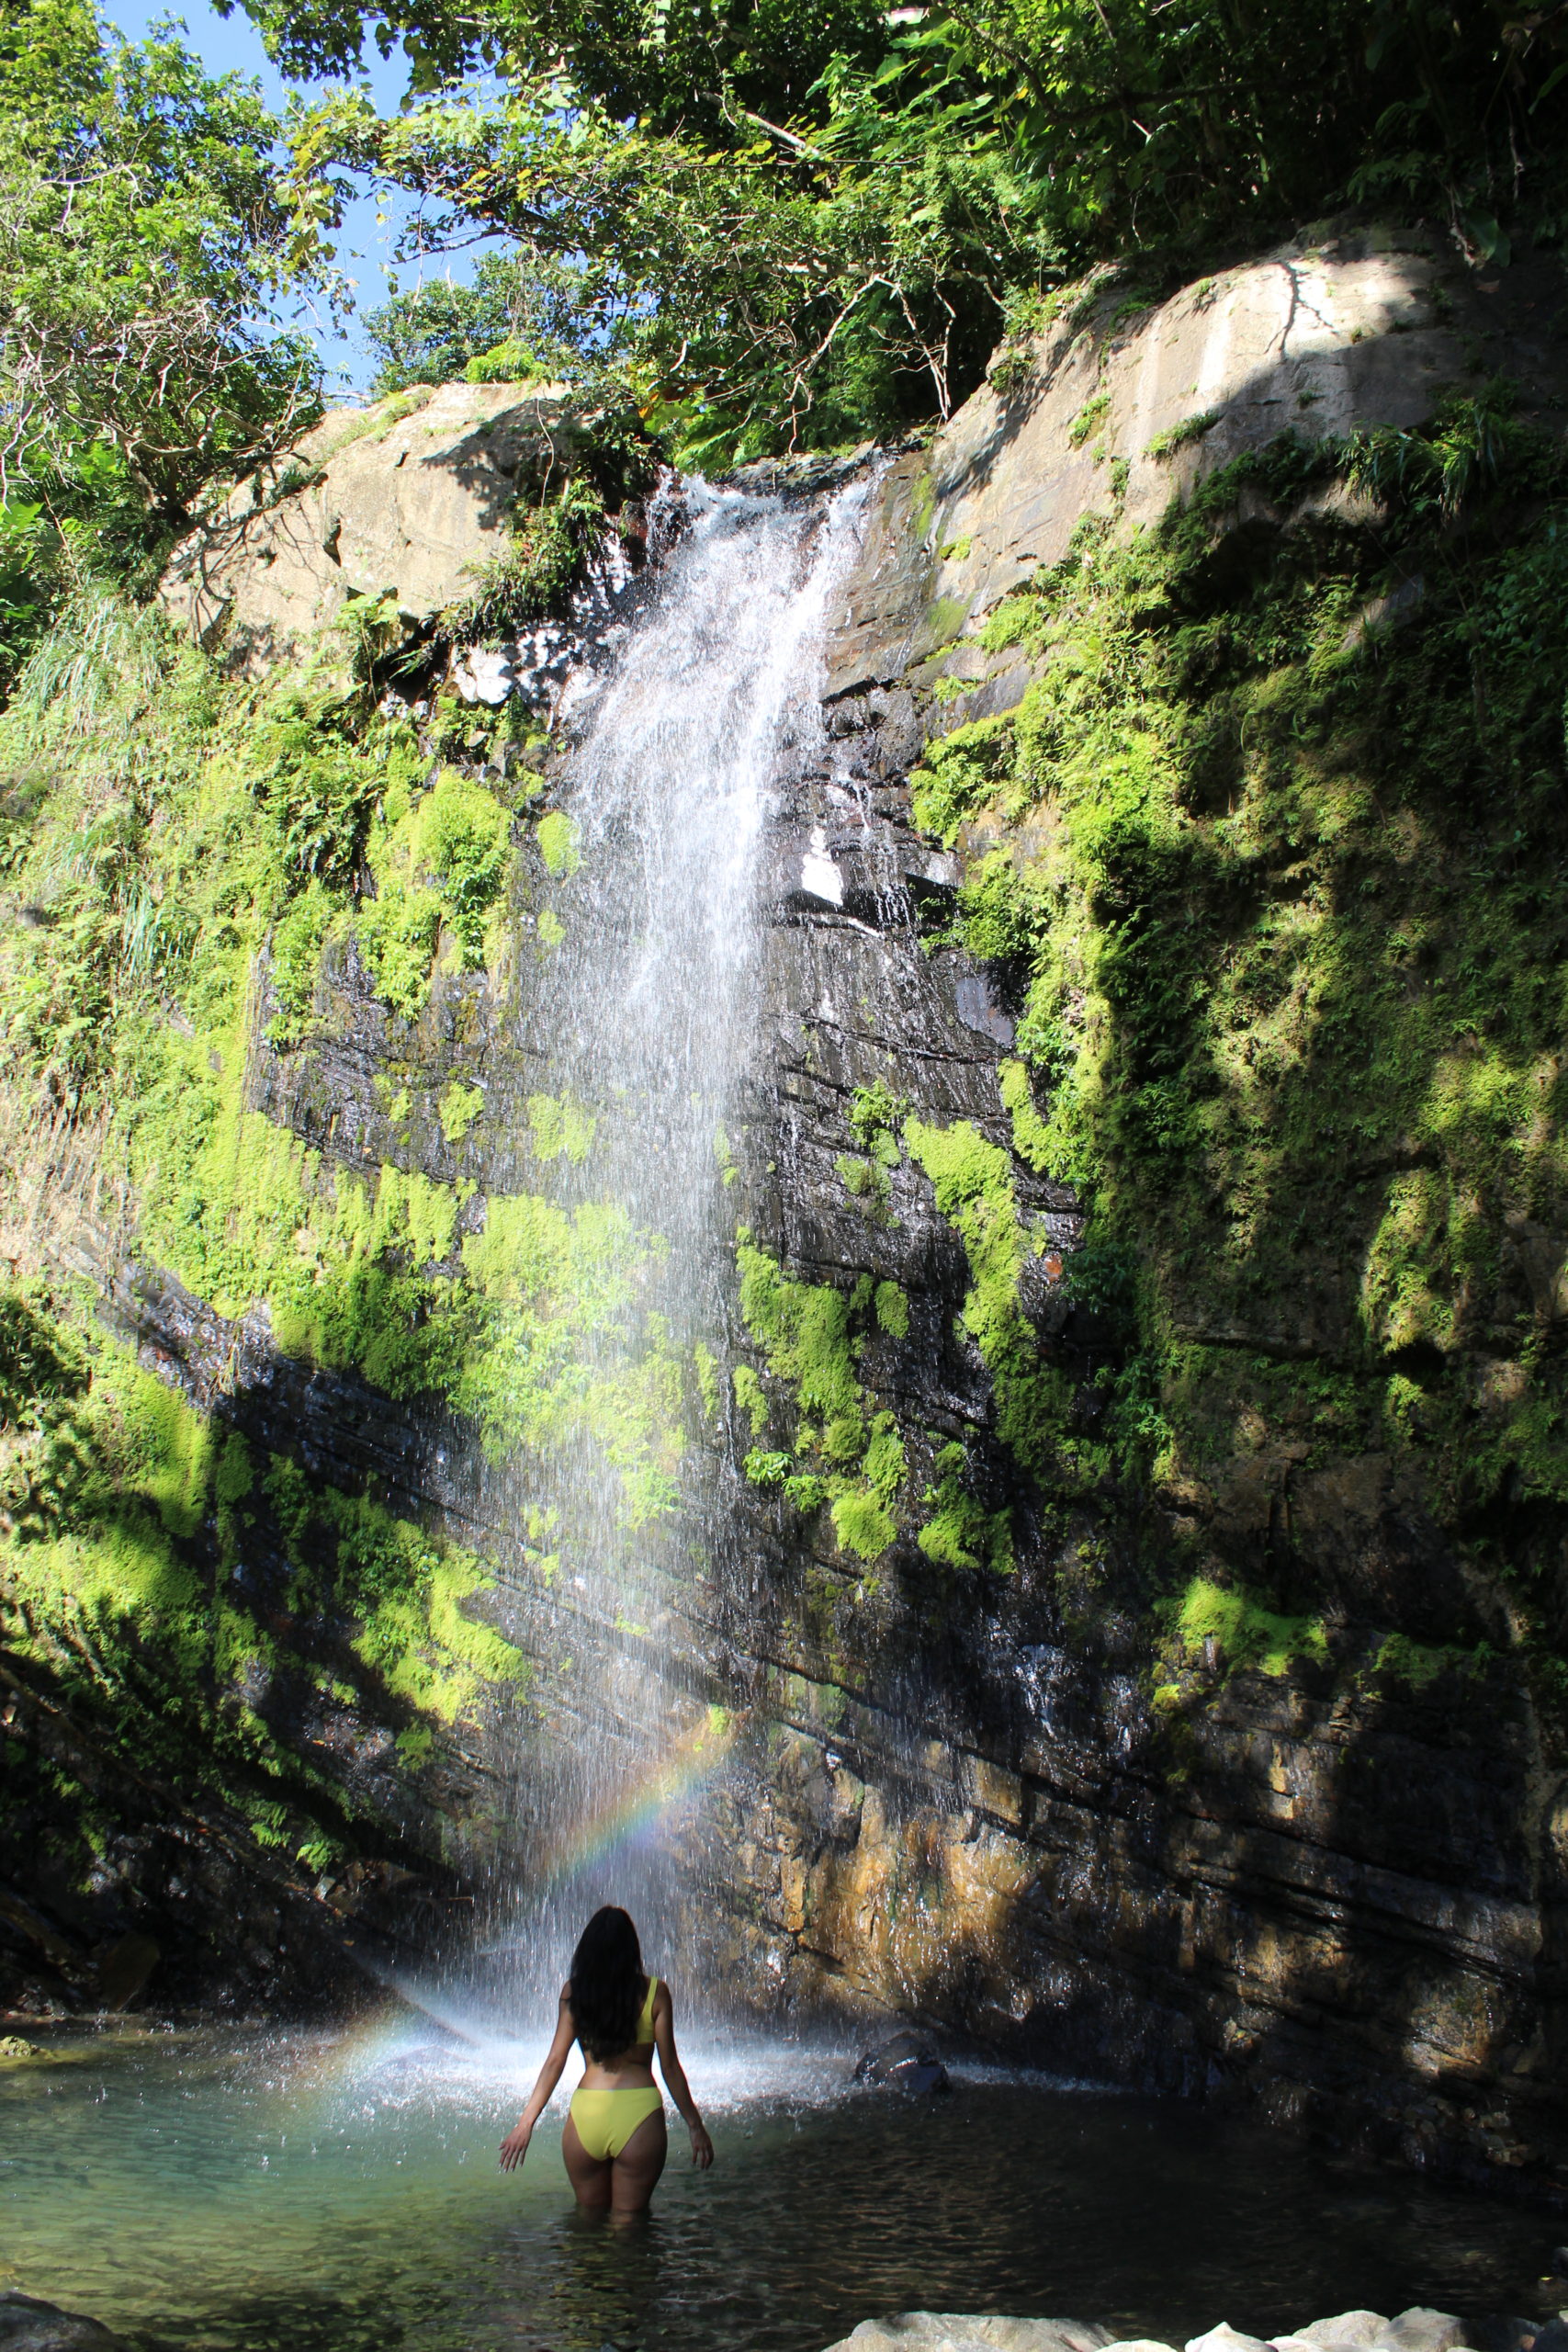 How Do I Find Juan Diego Falls? – A Complete Guide to El Yunque’s Secret Waterfall